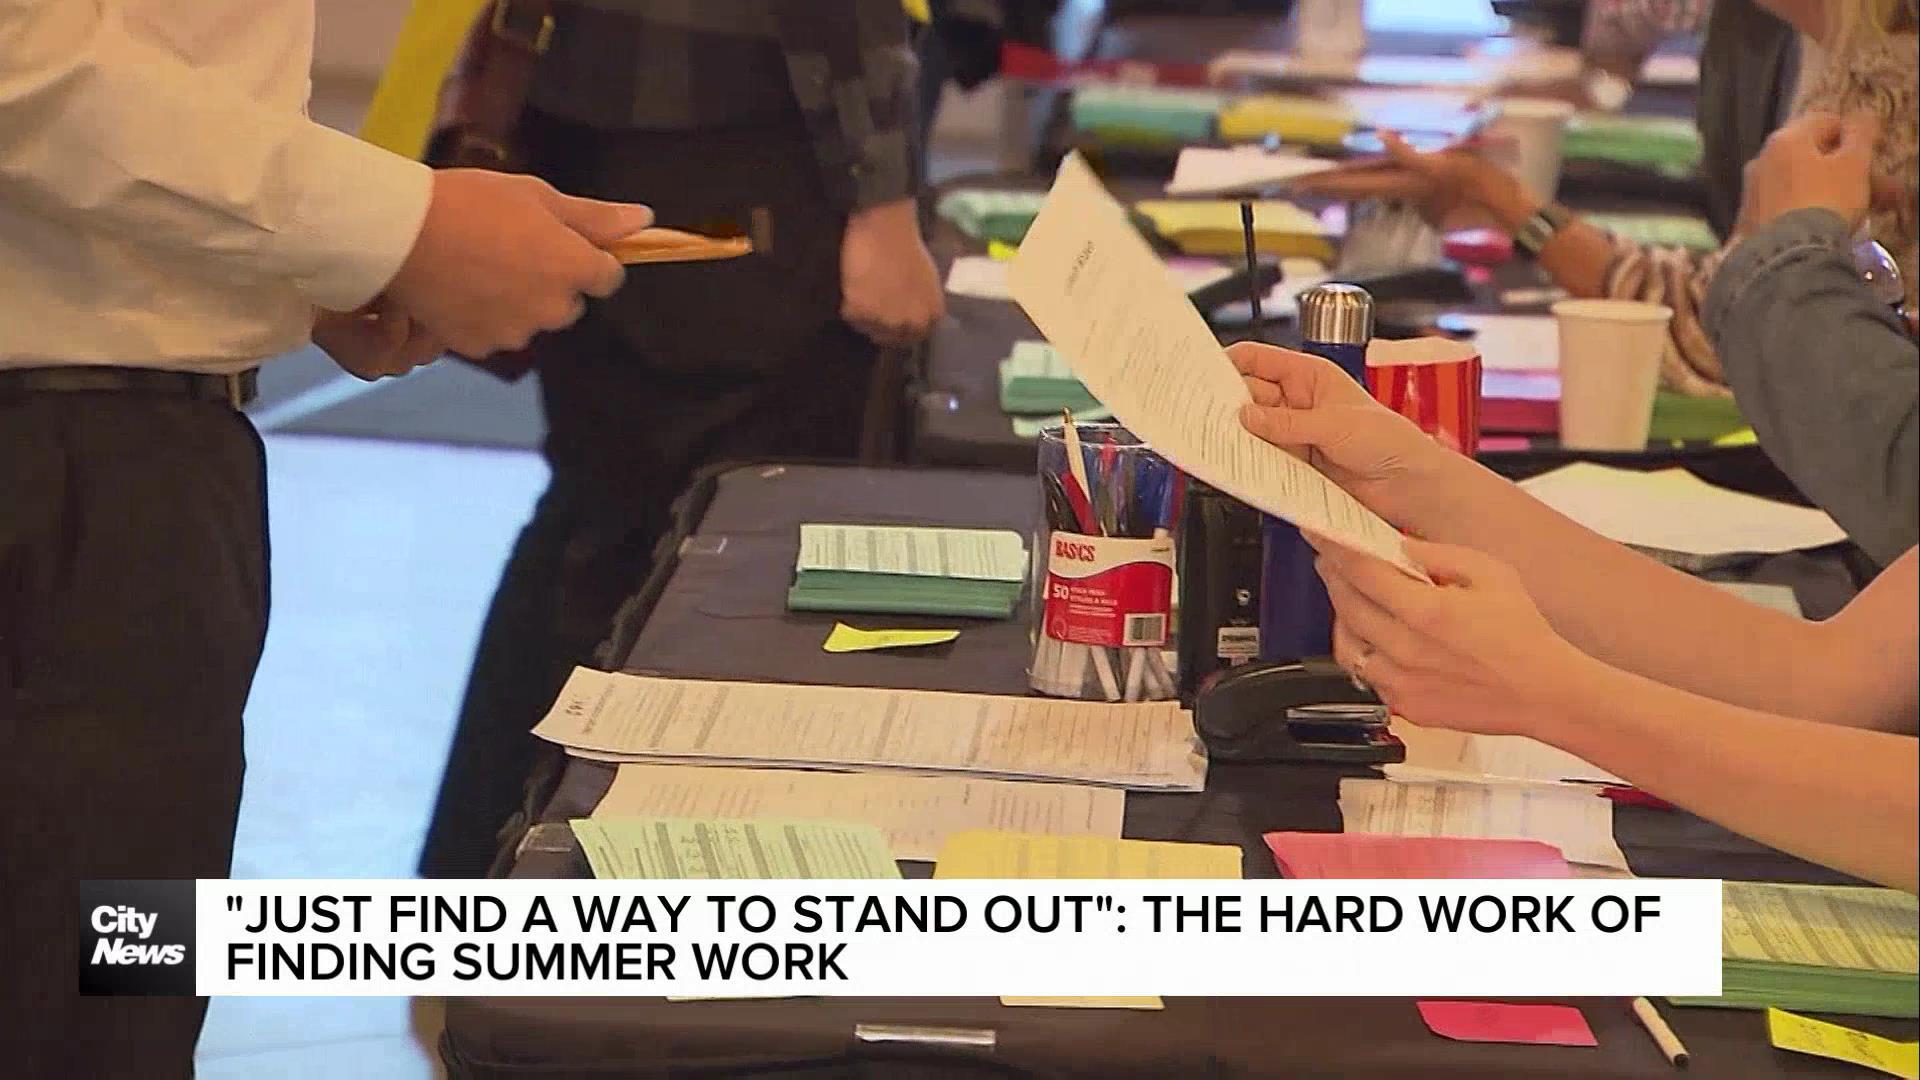 "Just find a way to stand out": The hard work of finding summer work